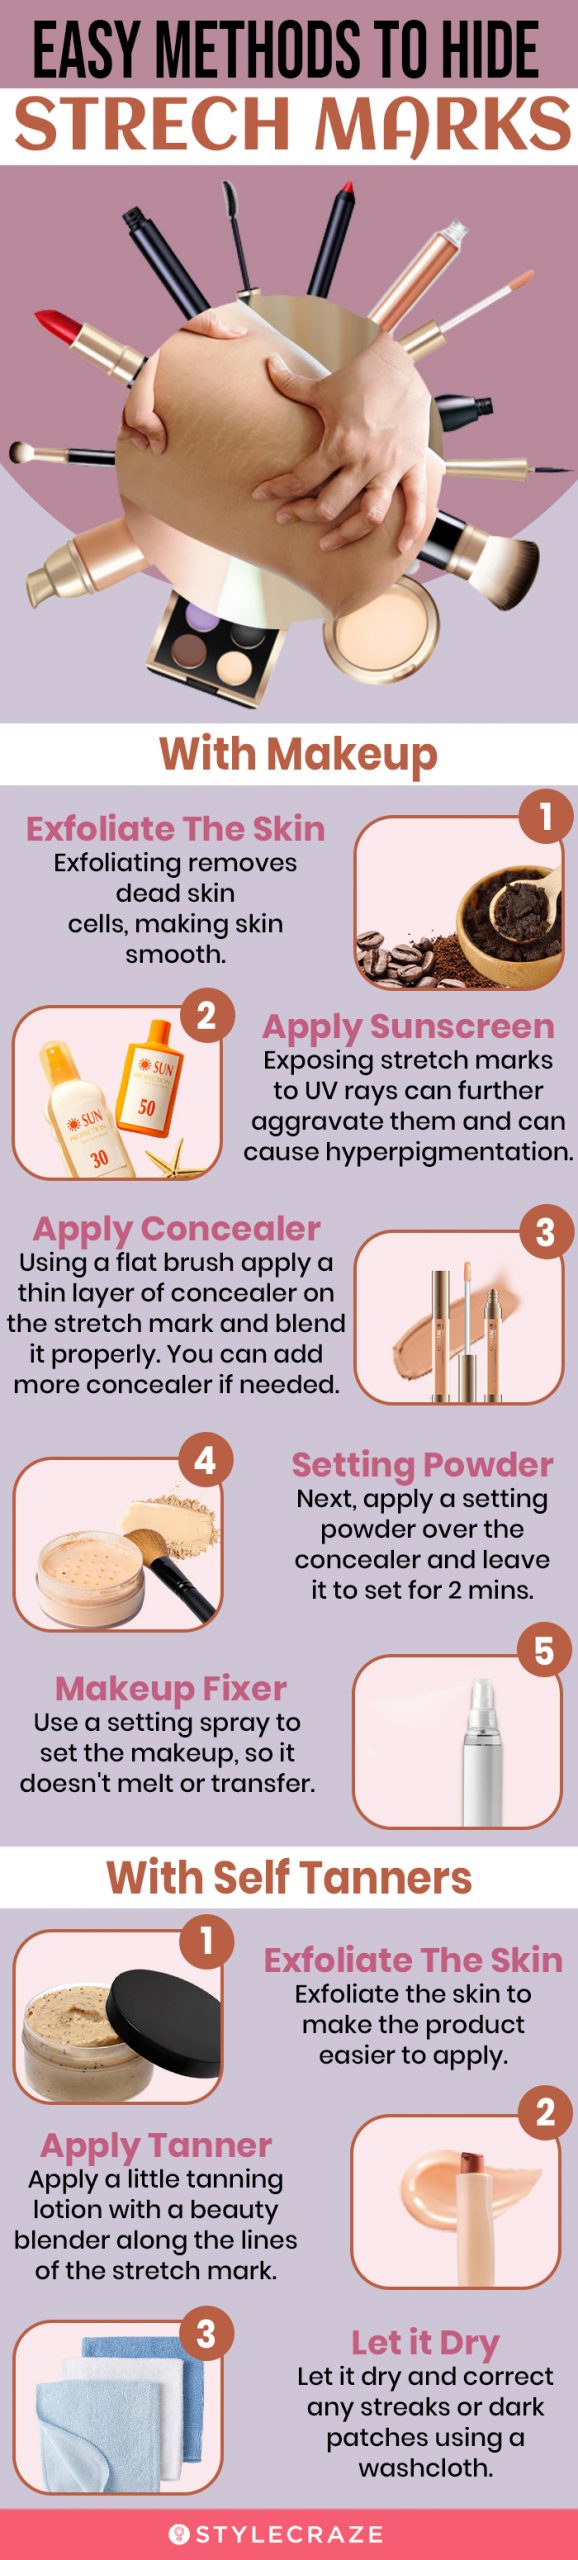 easy methods to hide stretch marks [infographic]